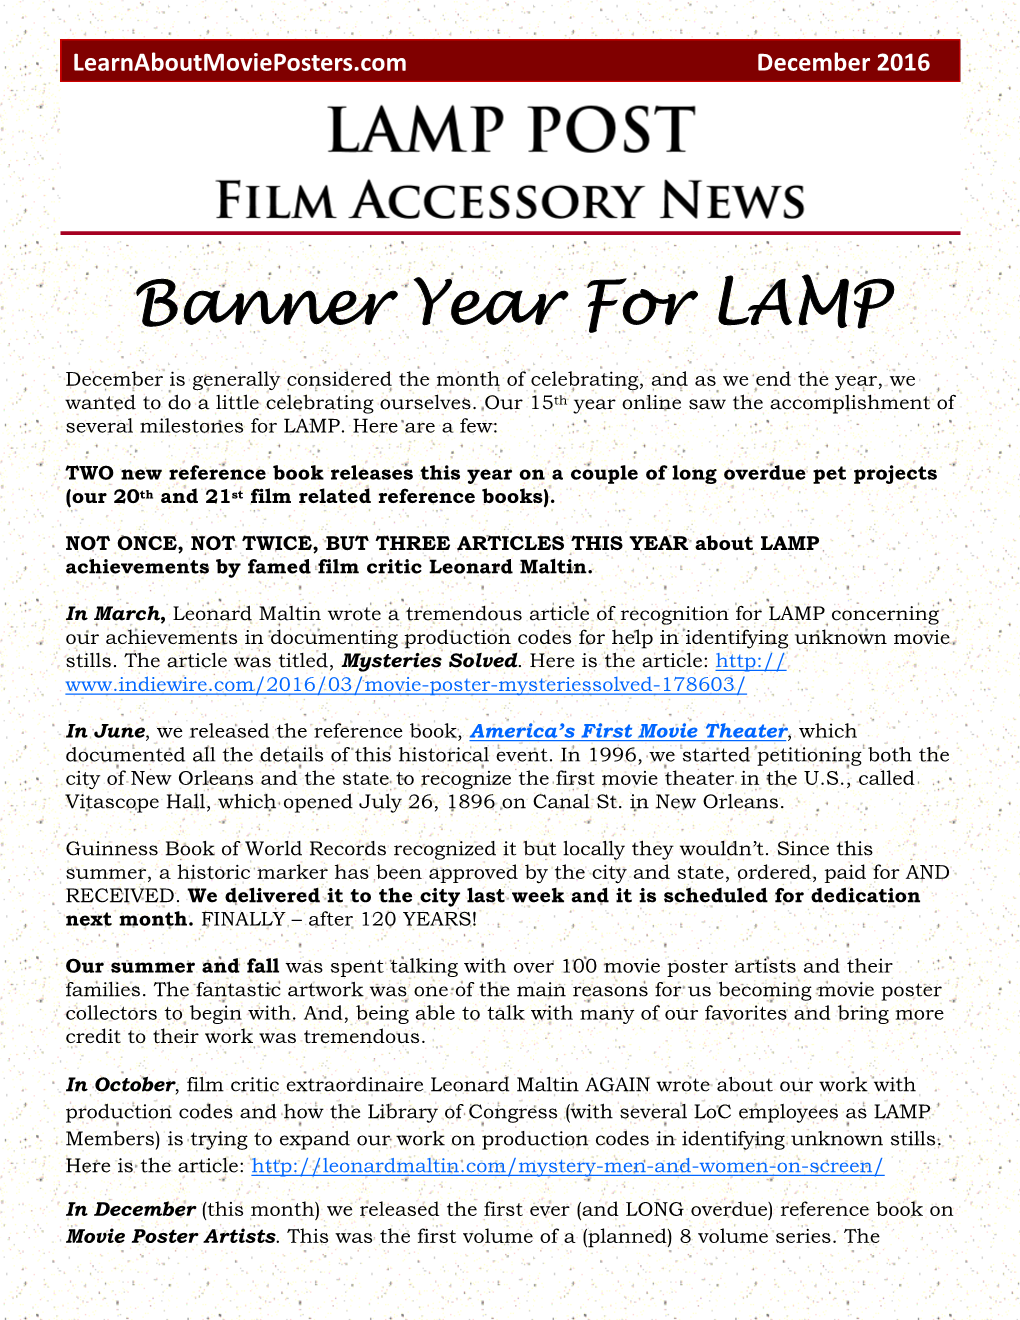 Banner Year for LAMP